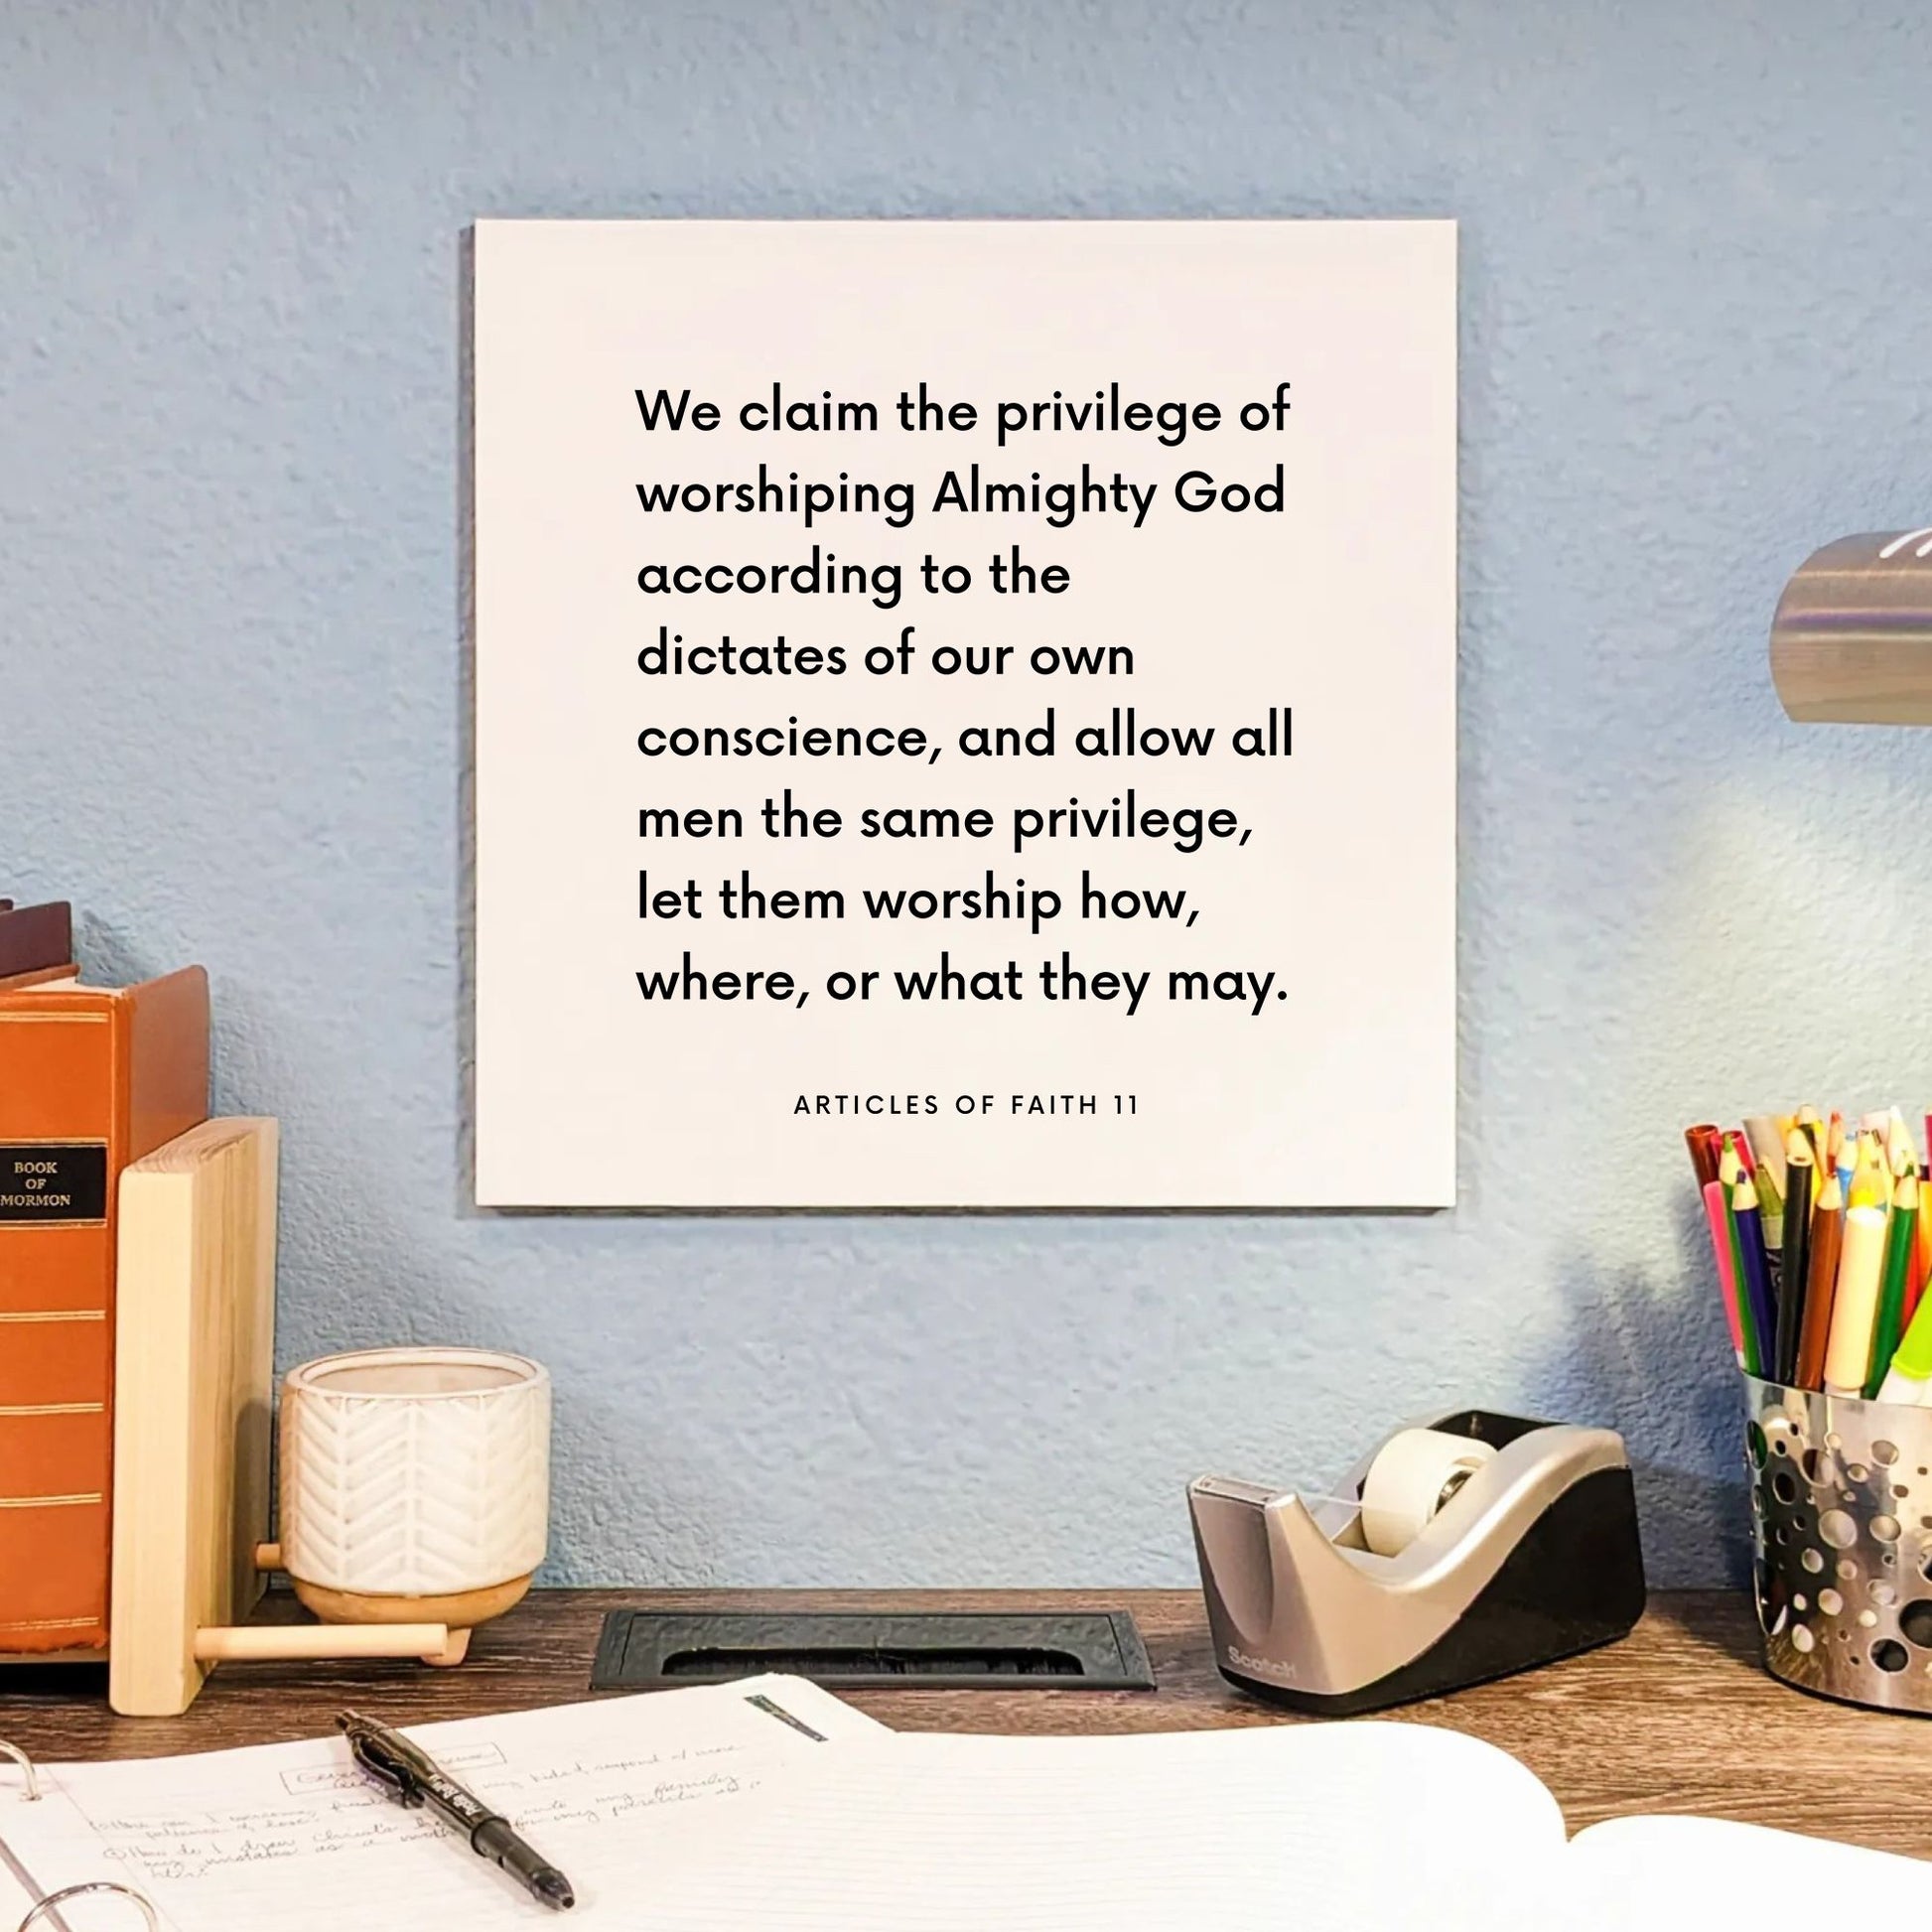 Desk mouting of the scripture tile for Articles of Faith 11 - "We claim the privilege of worshiping Almighty God"